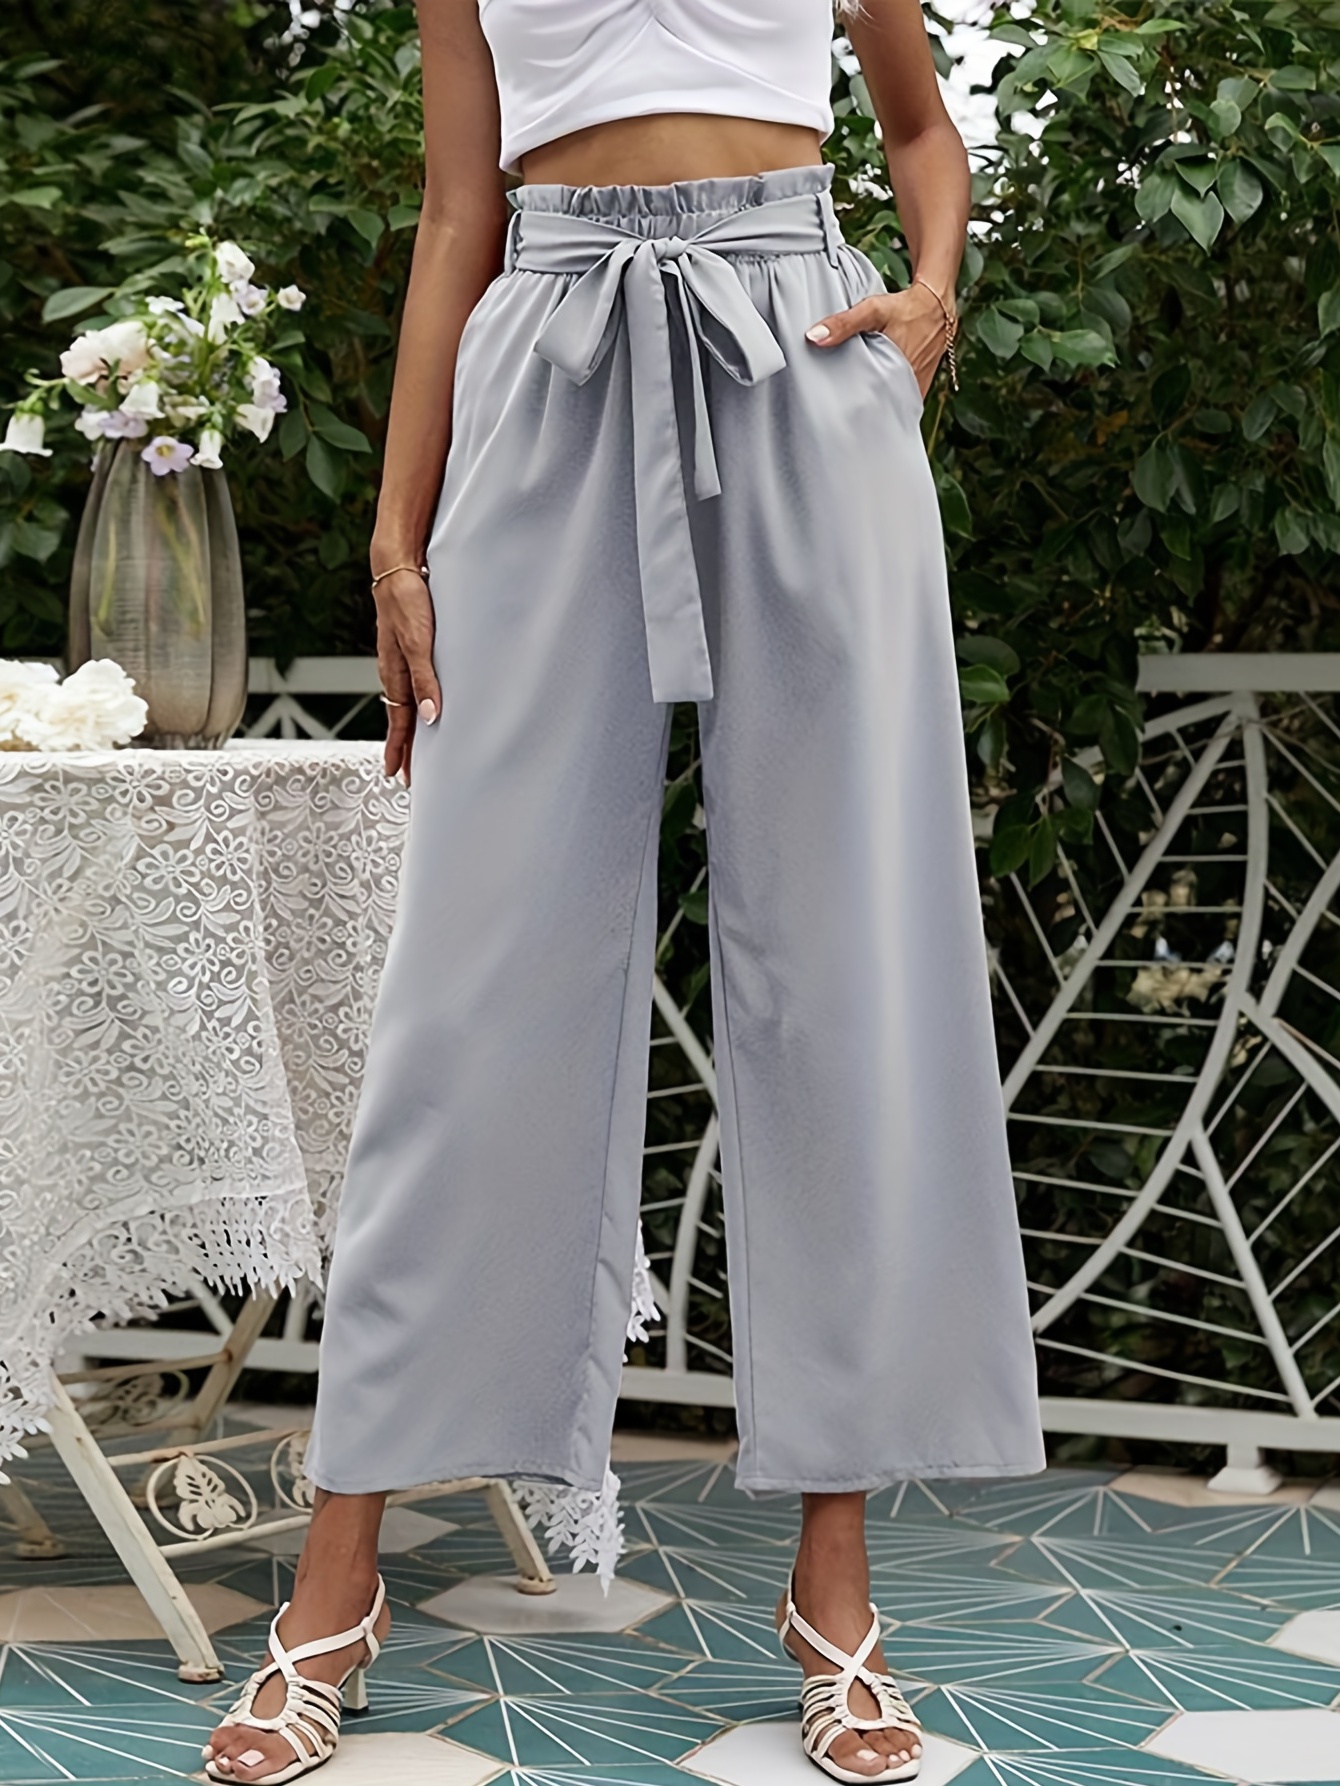 Summer Pants Women's Solid Pleated High Waist Smocked Lounge Trousers  Casual Loose Wide Leg Palazzo Pants